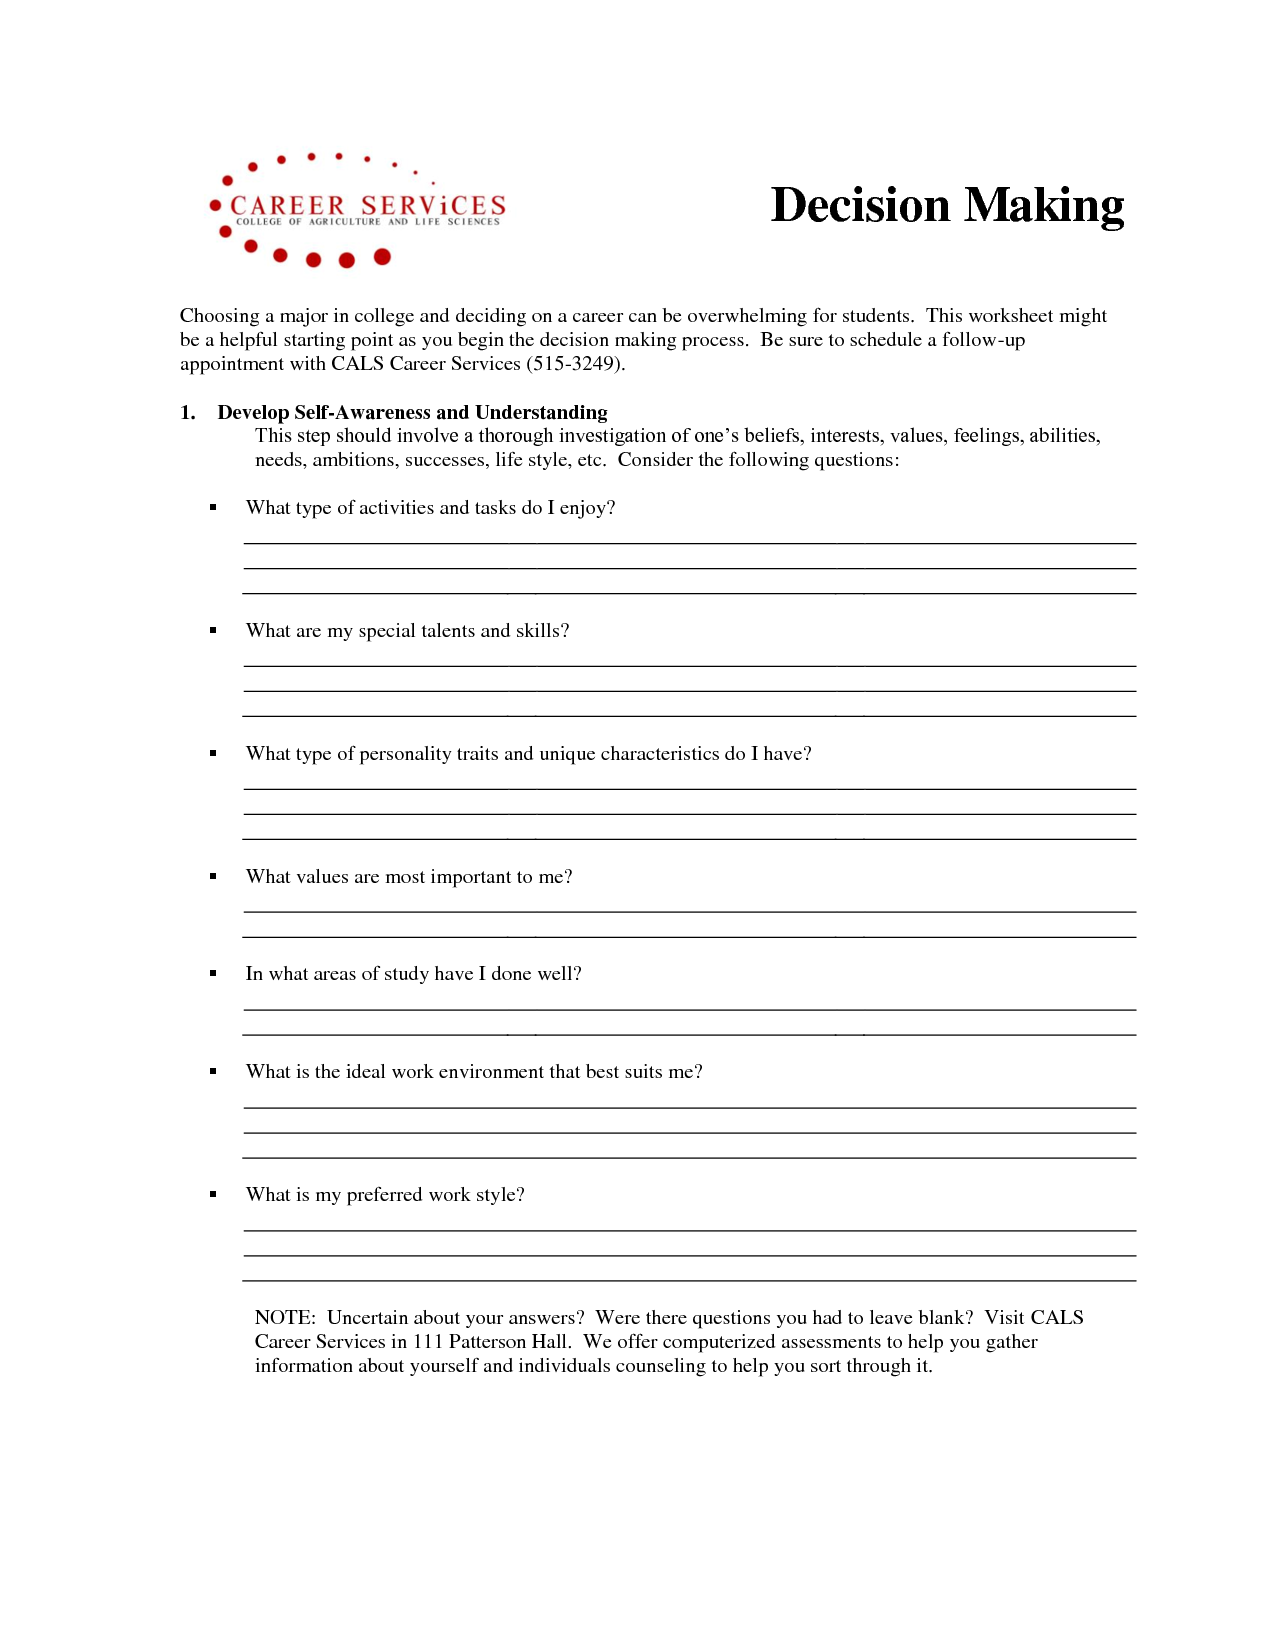 How Do Economic Decisions Affect Decision Making Worksheet Answers